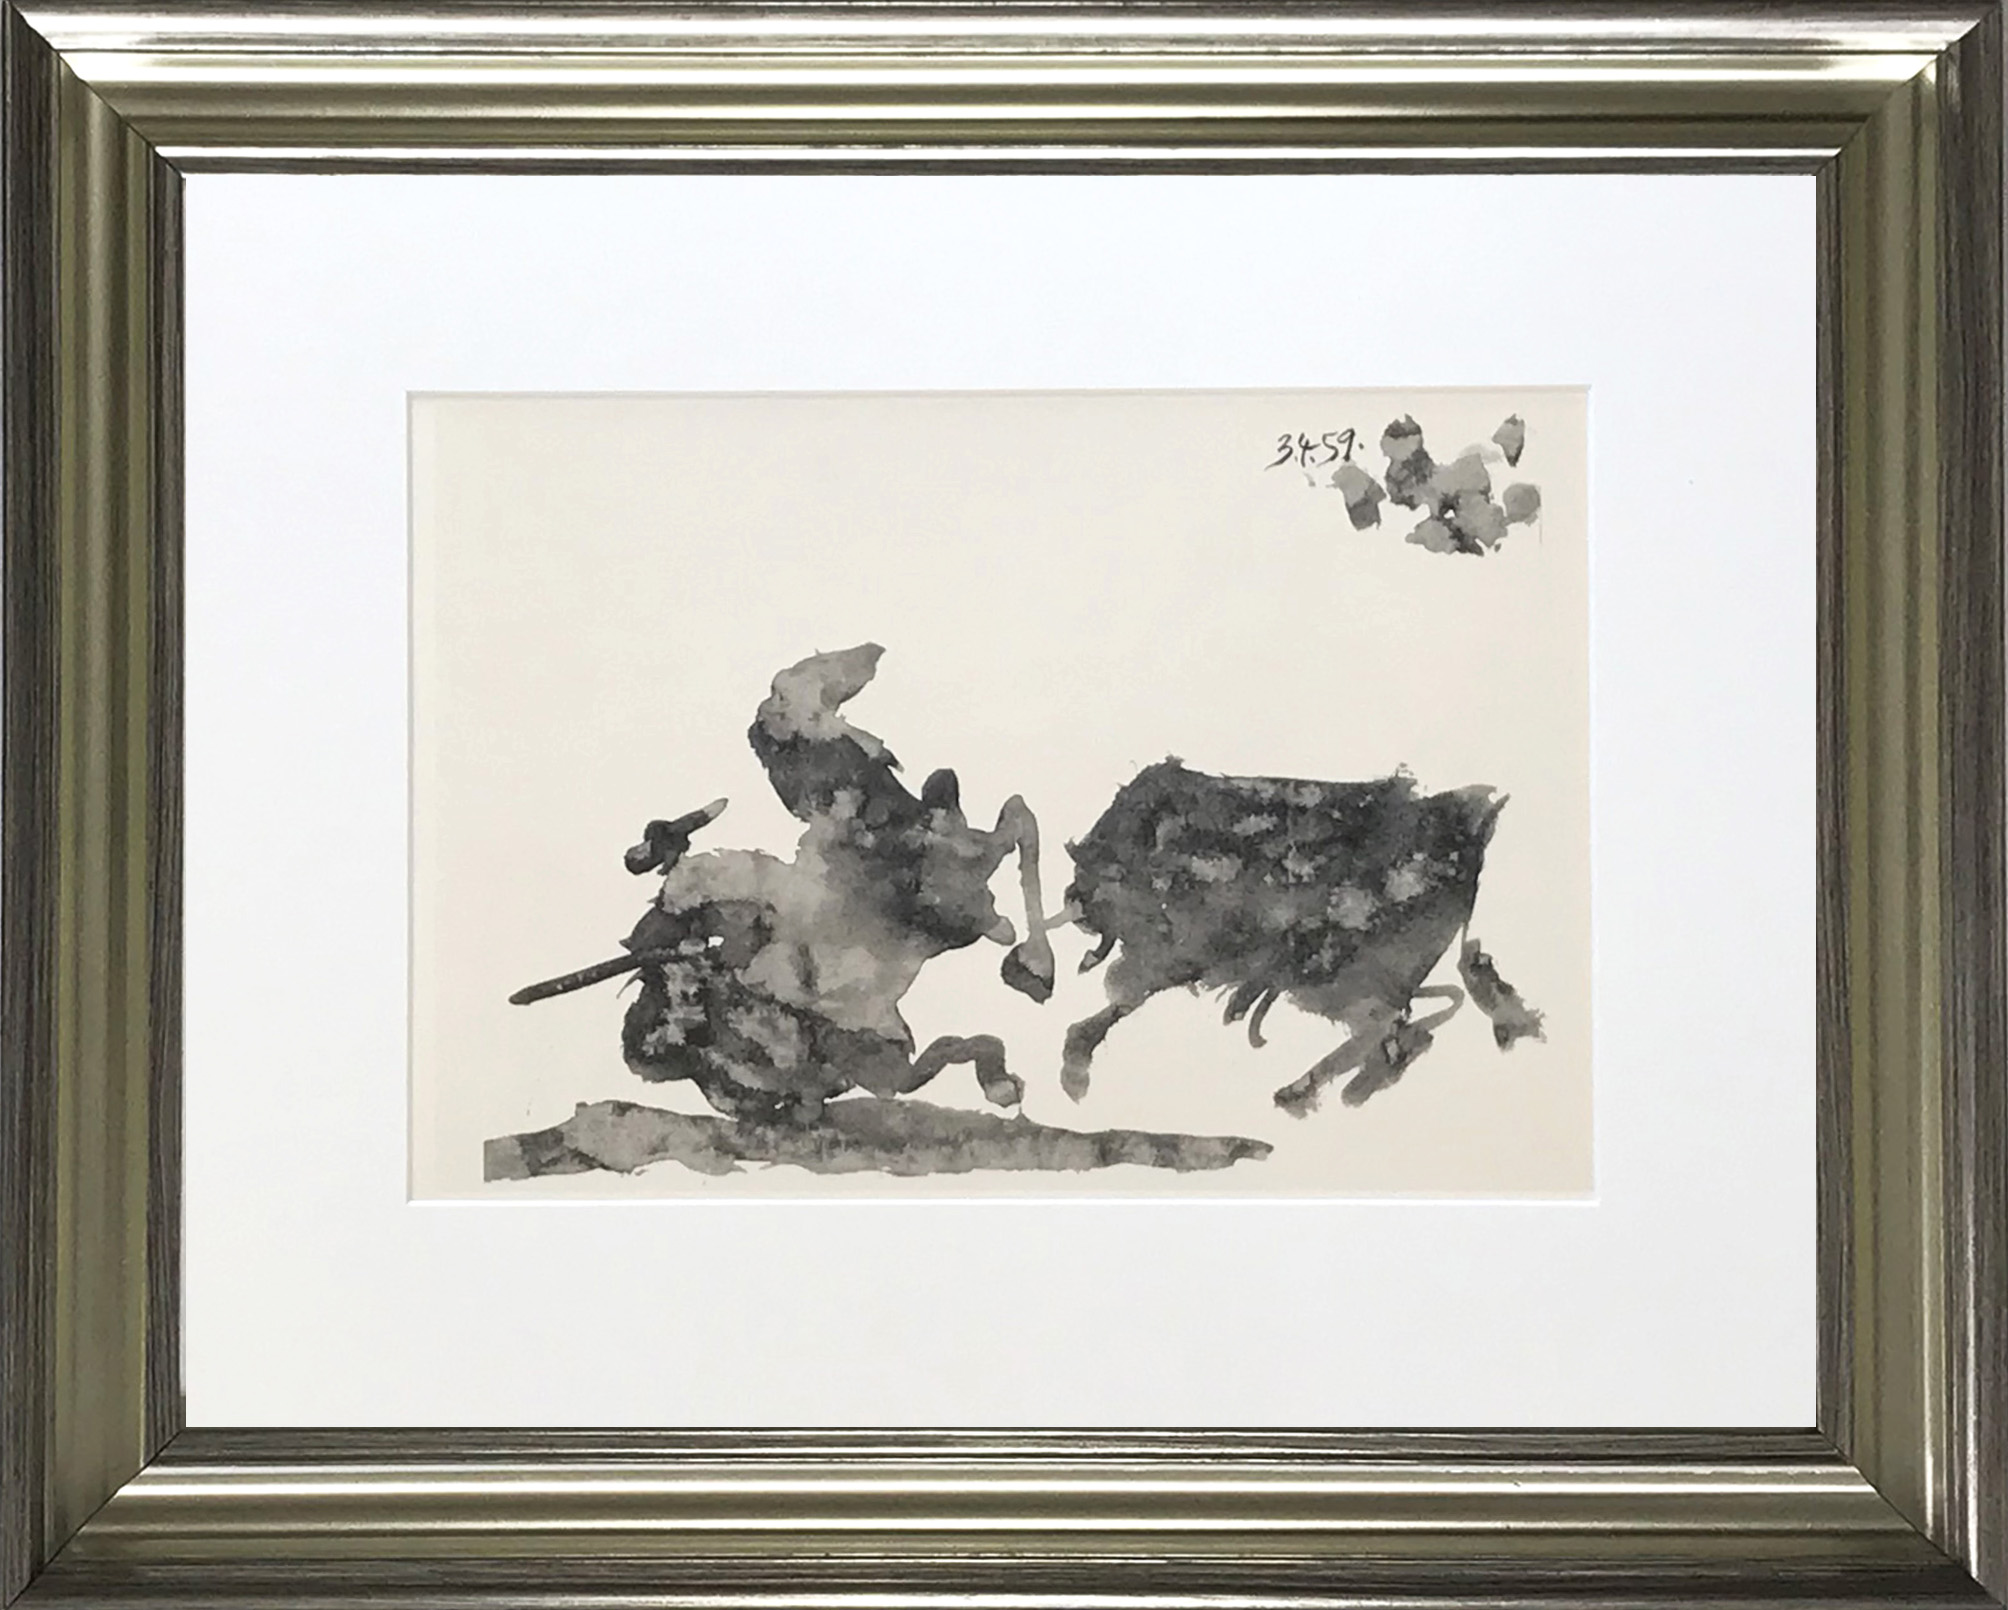 Picasso Toros Y Toreros 1961 framed S3 dated 3/4/59